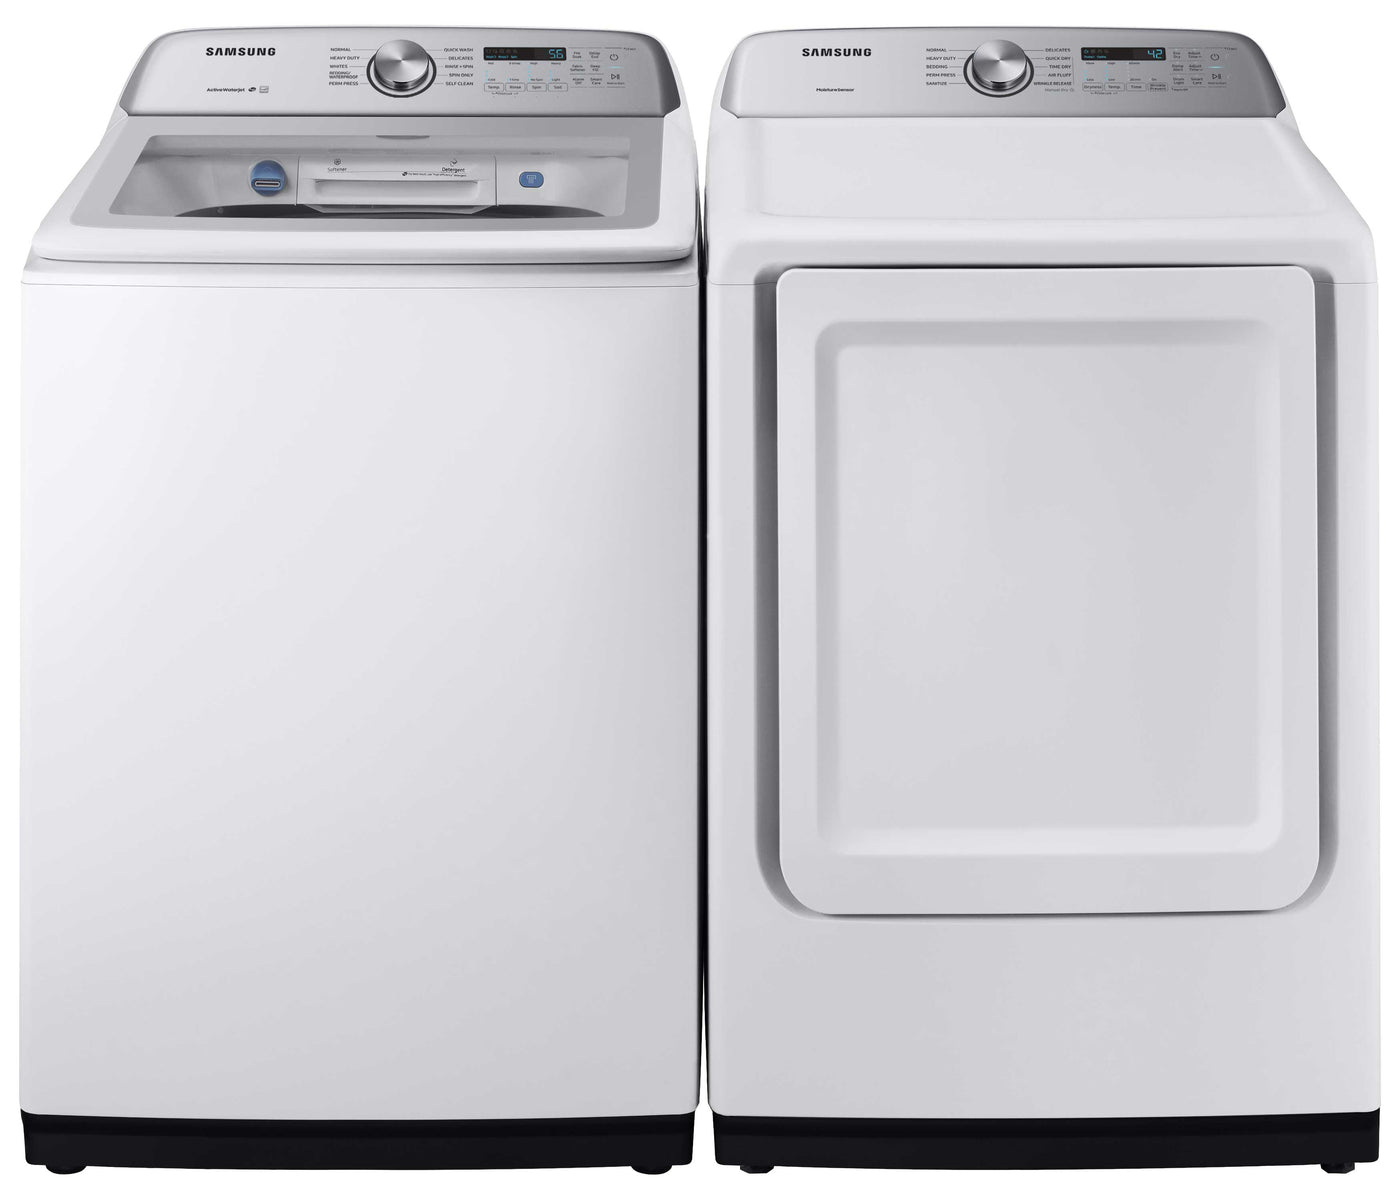 Samsung White Top-Load Washer (5.8 cu. ft.) & Electric Dryer (7.4 cu. ft.) - WA50R5200AW/DVE50T5205W